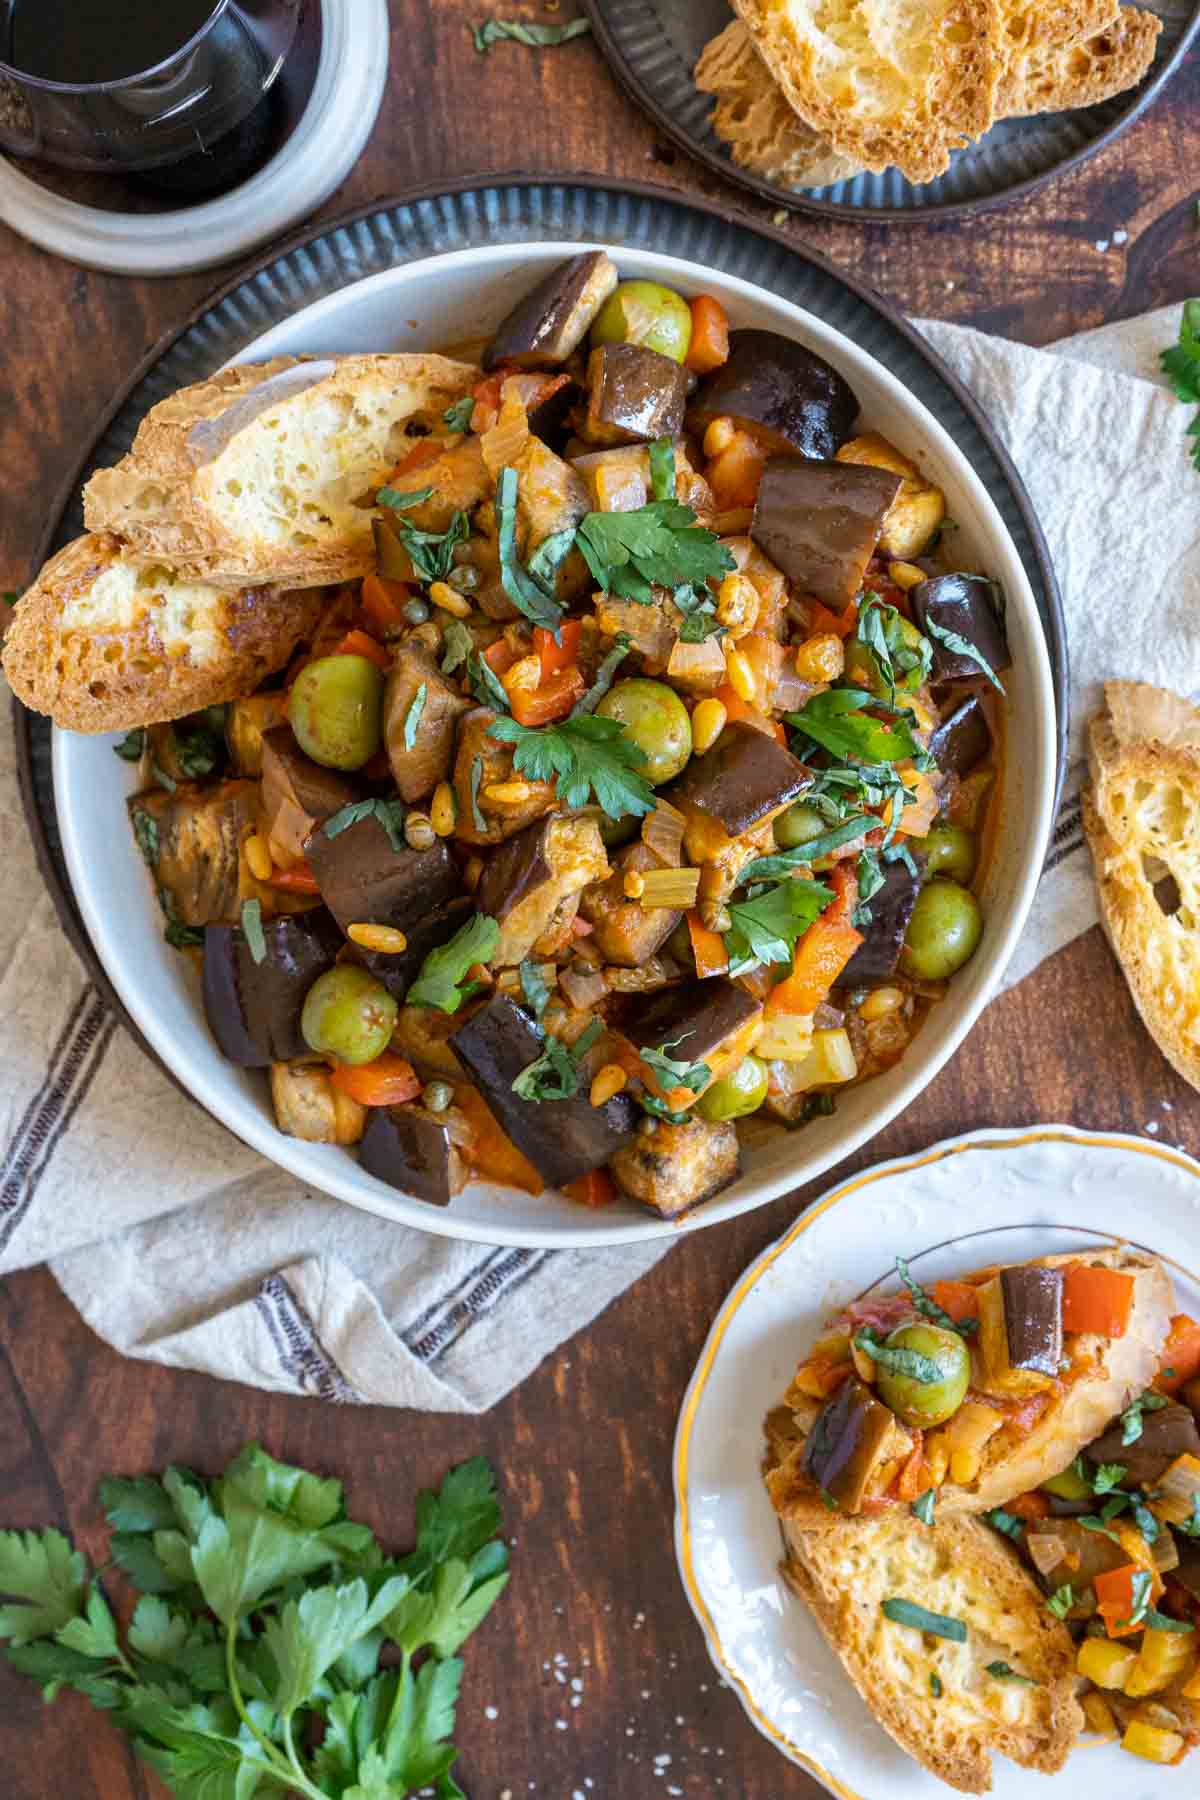 Caponata in a bowl with toasted bread and a plate of bruschetta.